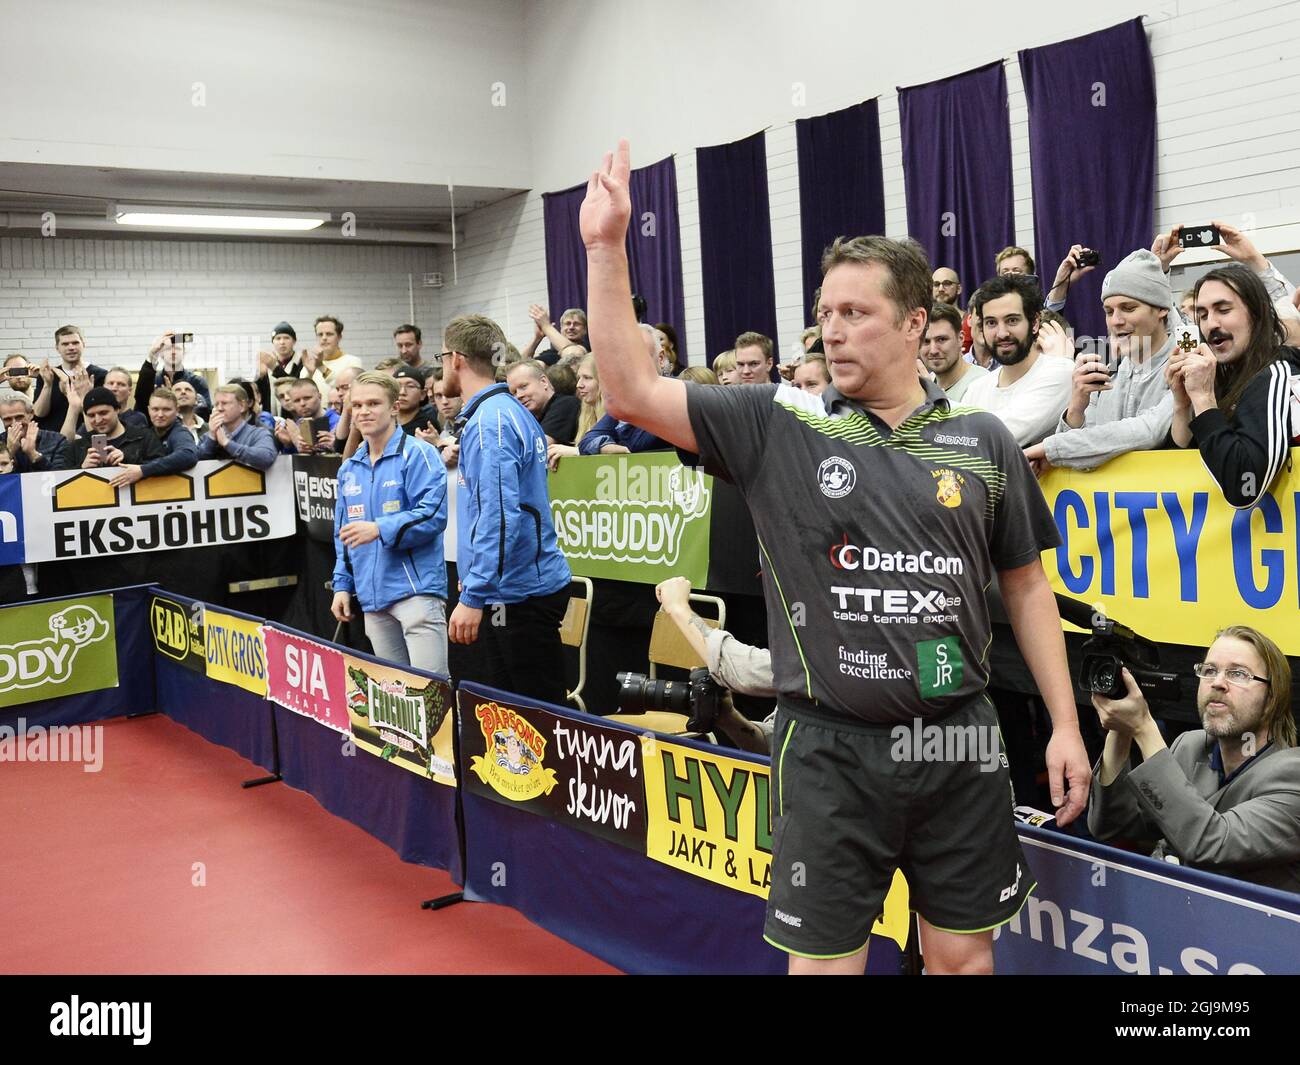 STOCKHOLM 2016-02-11 SwedernÂ´s teable tennis legend 50 years old Jan-Ove Waldner played his last match in Stoclkholm.,Sweden , February 11, 2017. Olympic goldmedalist and world champion Waldner Ãs widely regarded as being the greatest table tennis player of all time. A legend in his native Sweden as well as in China Foto: Maja Suslin / TT kod 10300  Stock Photo